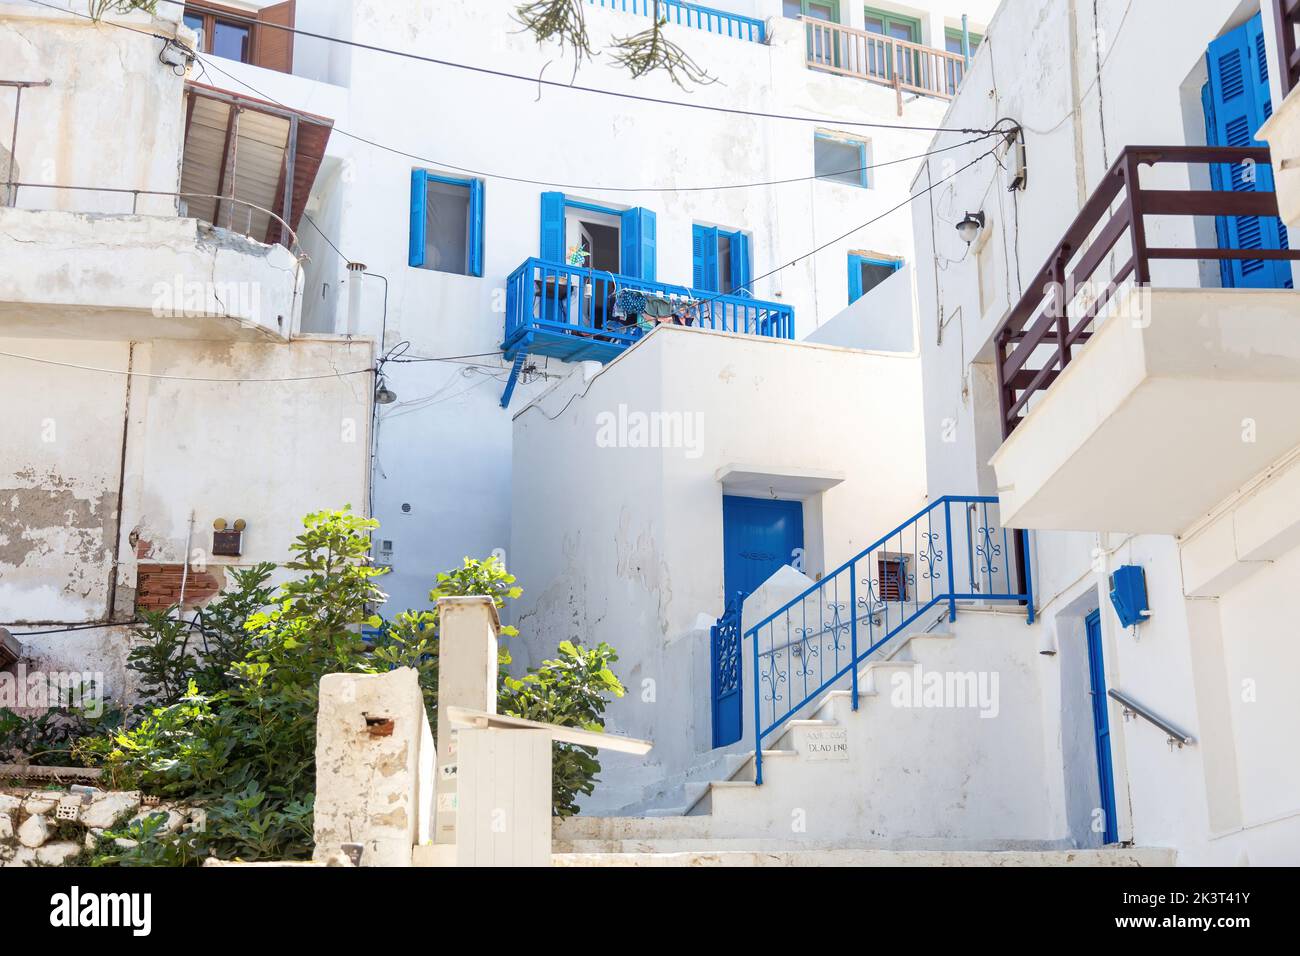 Cyclades Naxos island, Greece. Whitewashed buildings, balconies and stairs. Traditional architecture in white and blue colors. Summer holiday destinat Stock Photo